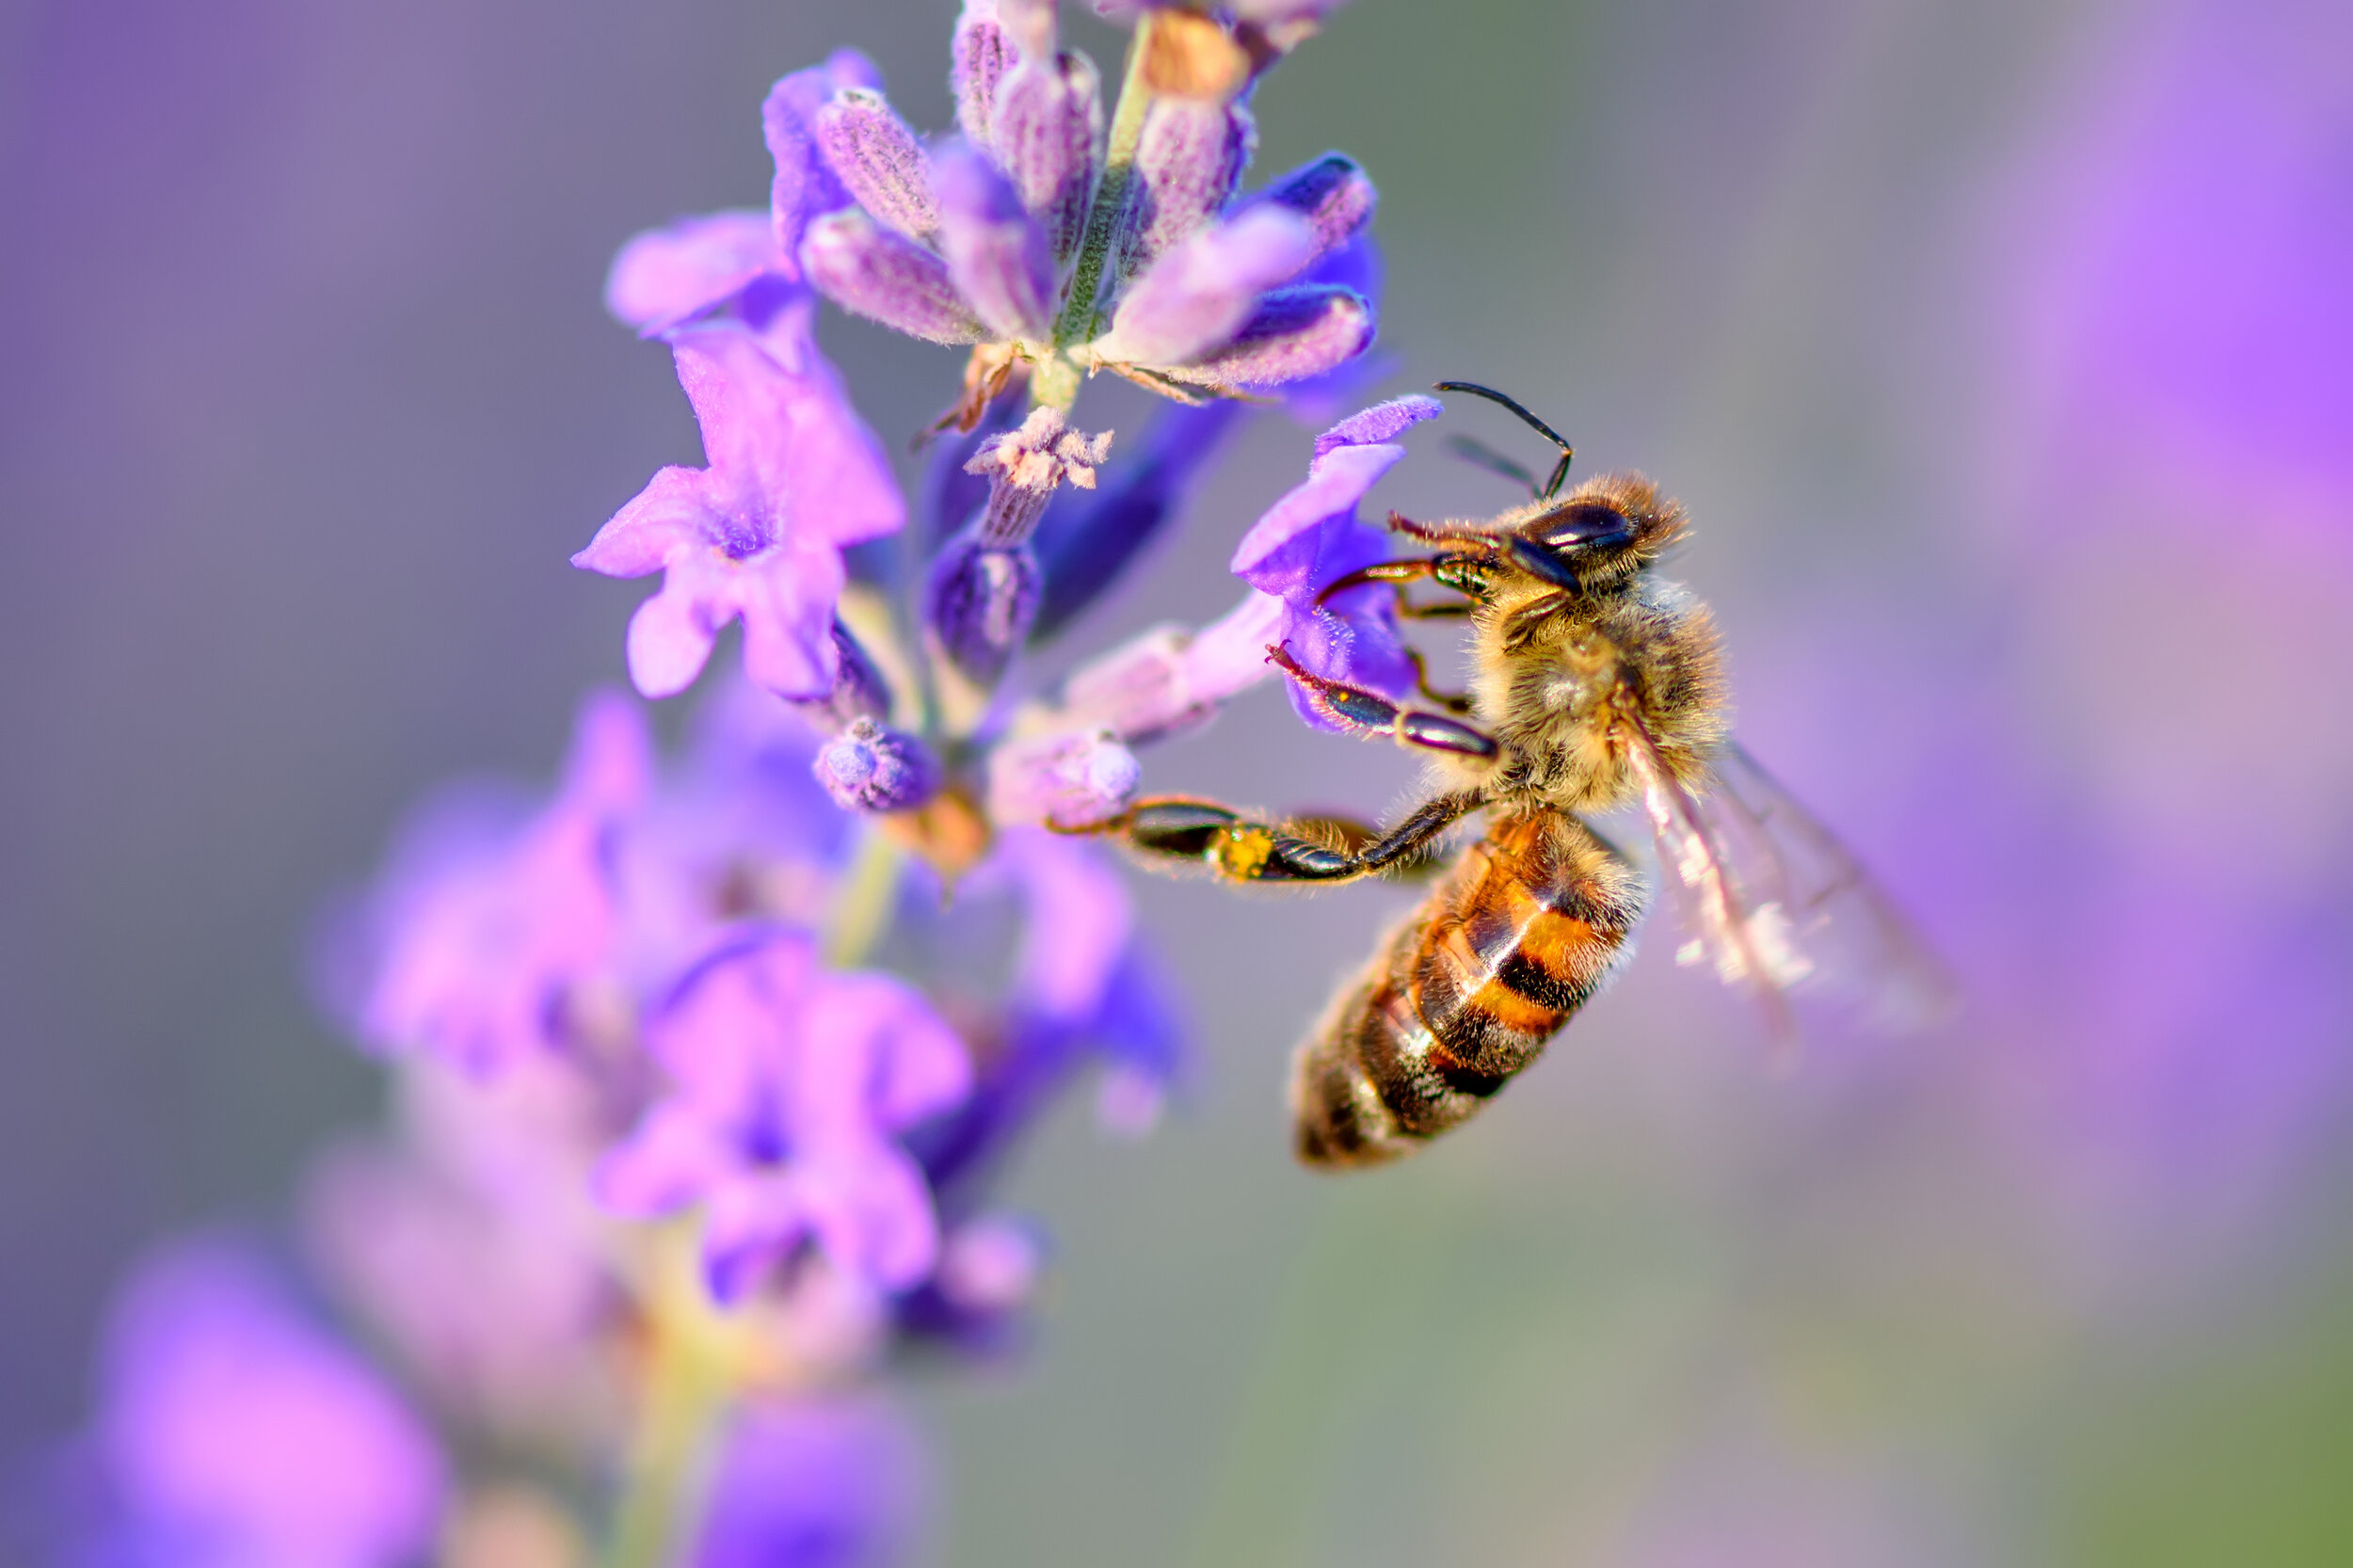 bee-pollinates-the-lavender-flowers-plant-decay-wi-63GNYM7.jpg